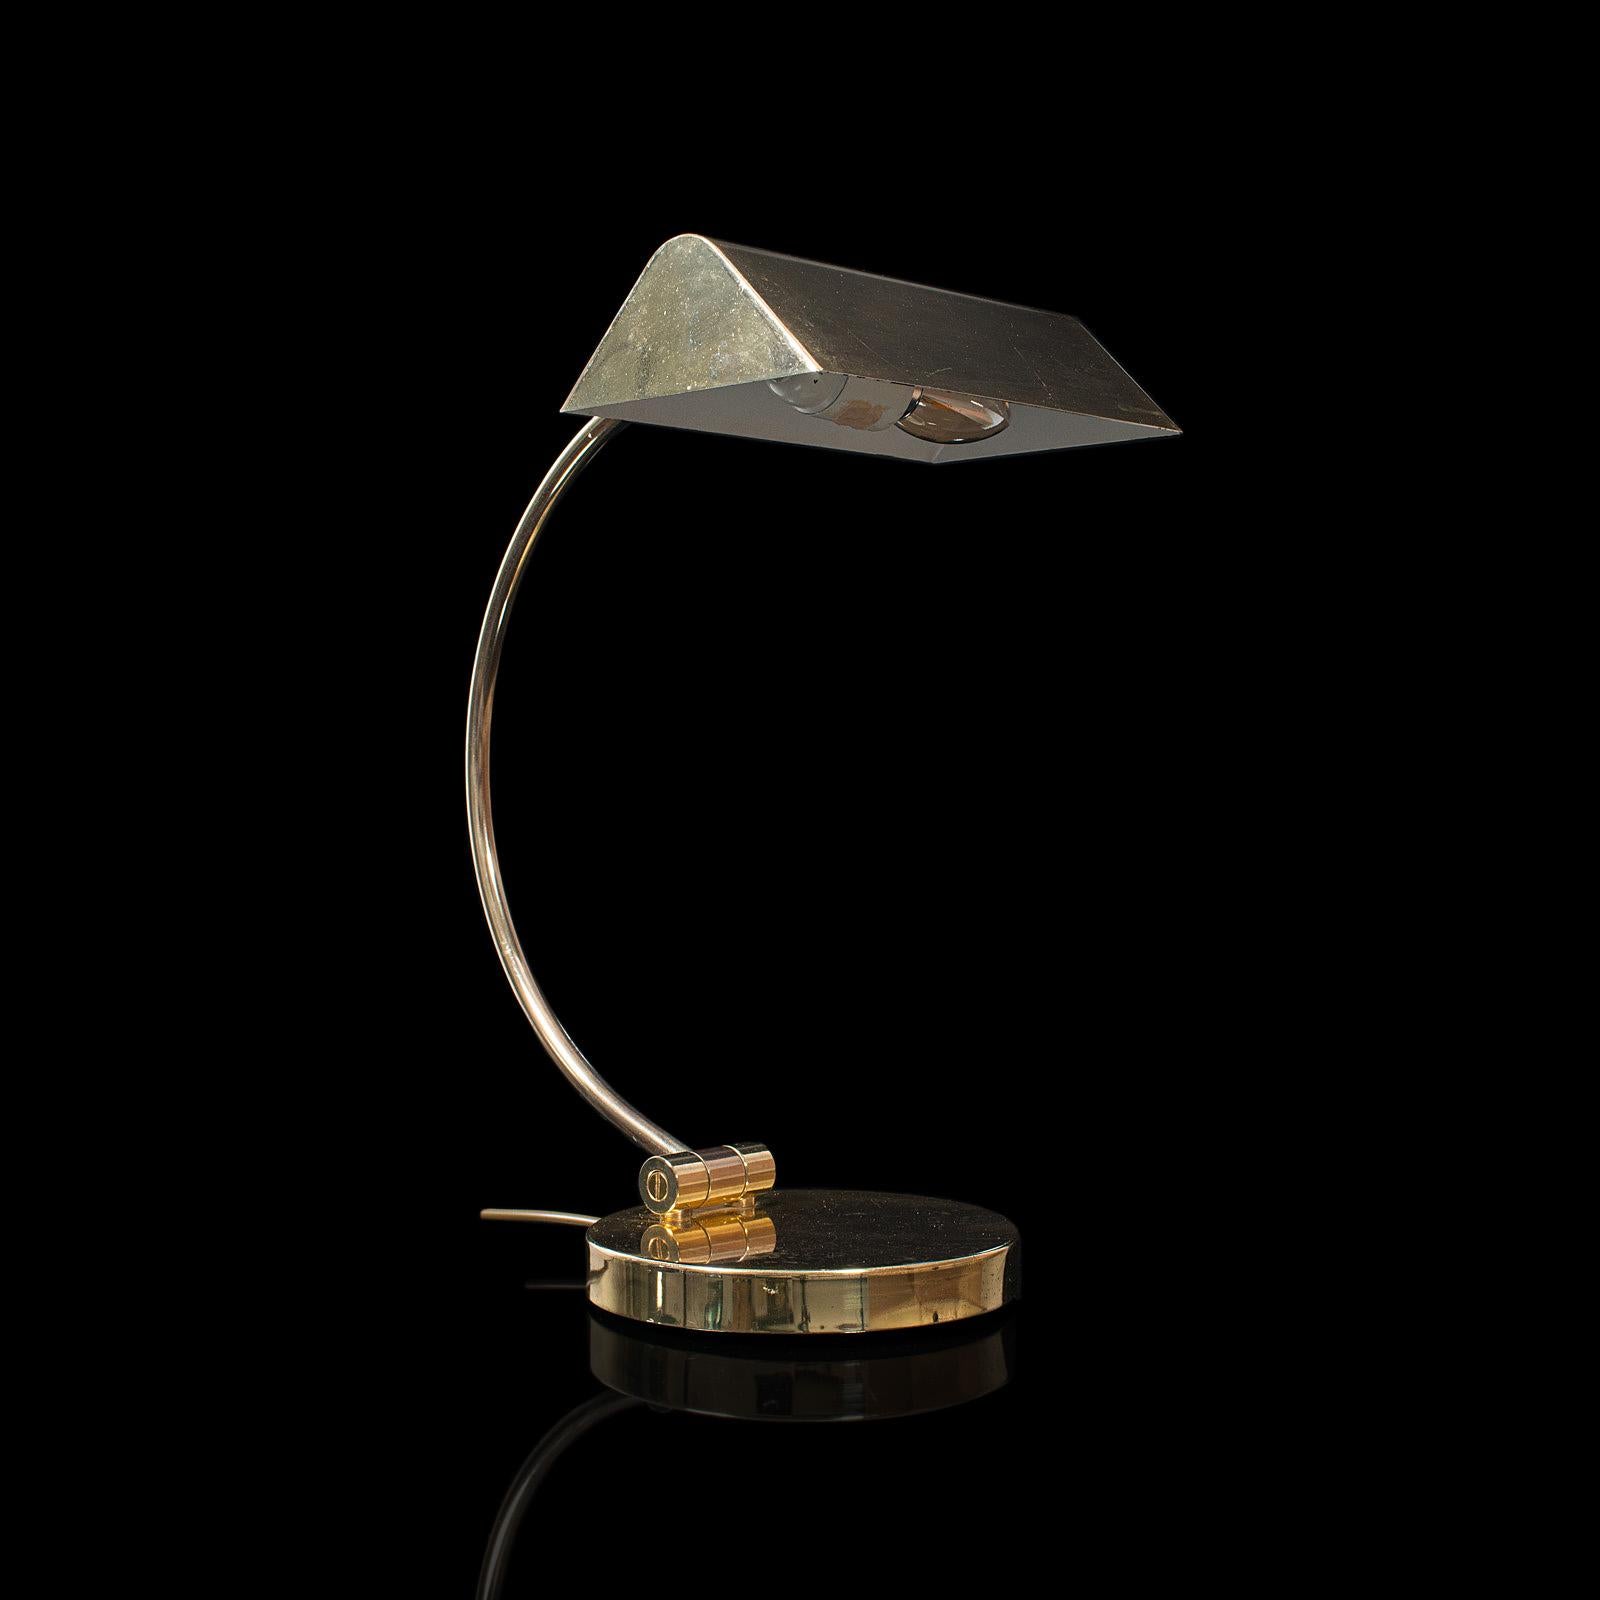 This is a vintage barrister's lamp. A Continental, brass banker's desk light, dating to the late 20th century, circa 1970.

Versatile desk lamp with appealing finish
Displaying a desirable aged patina with pleasing light tarnishing commensurate